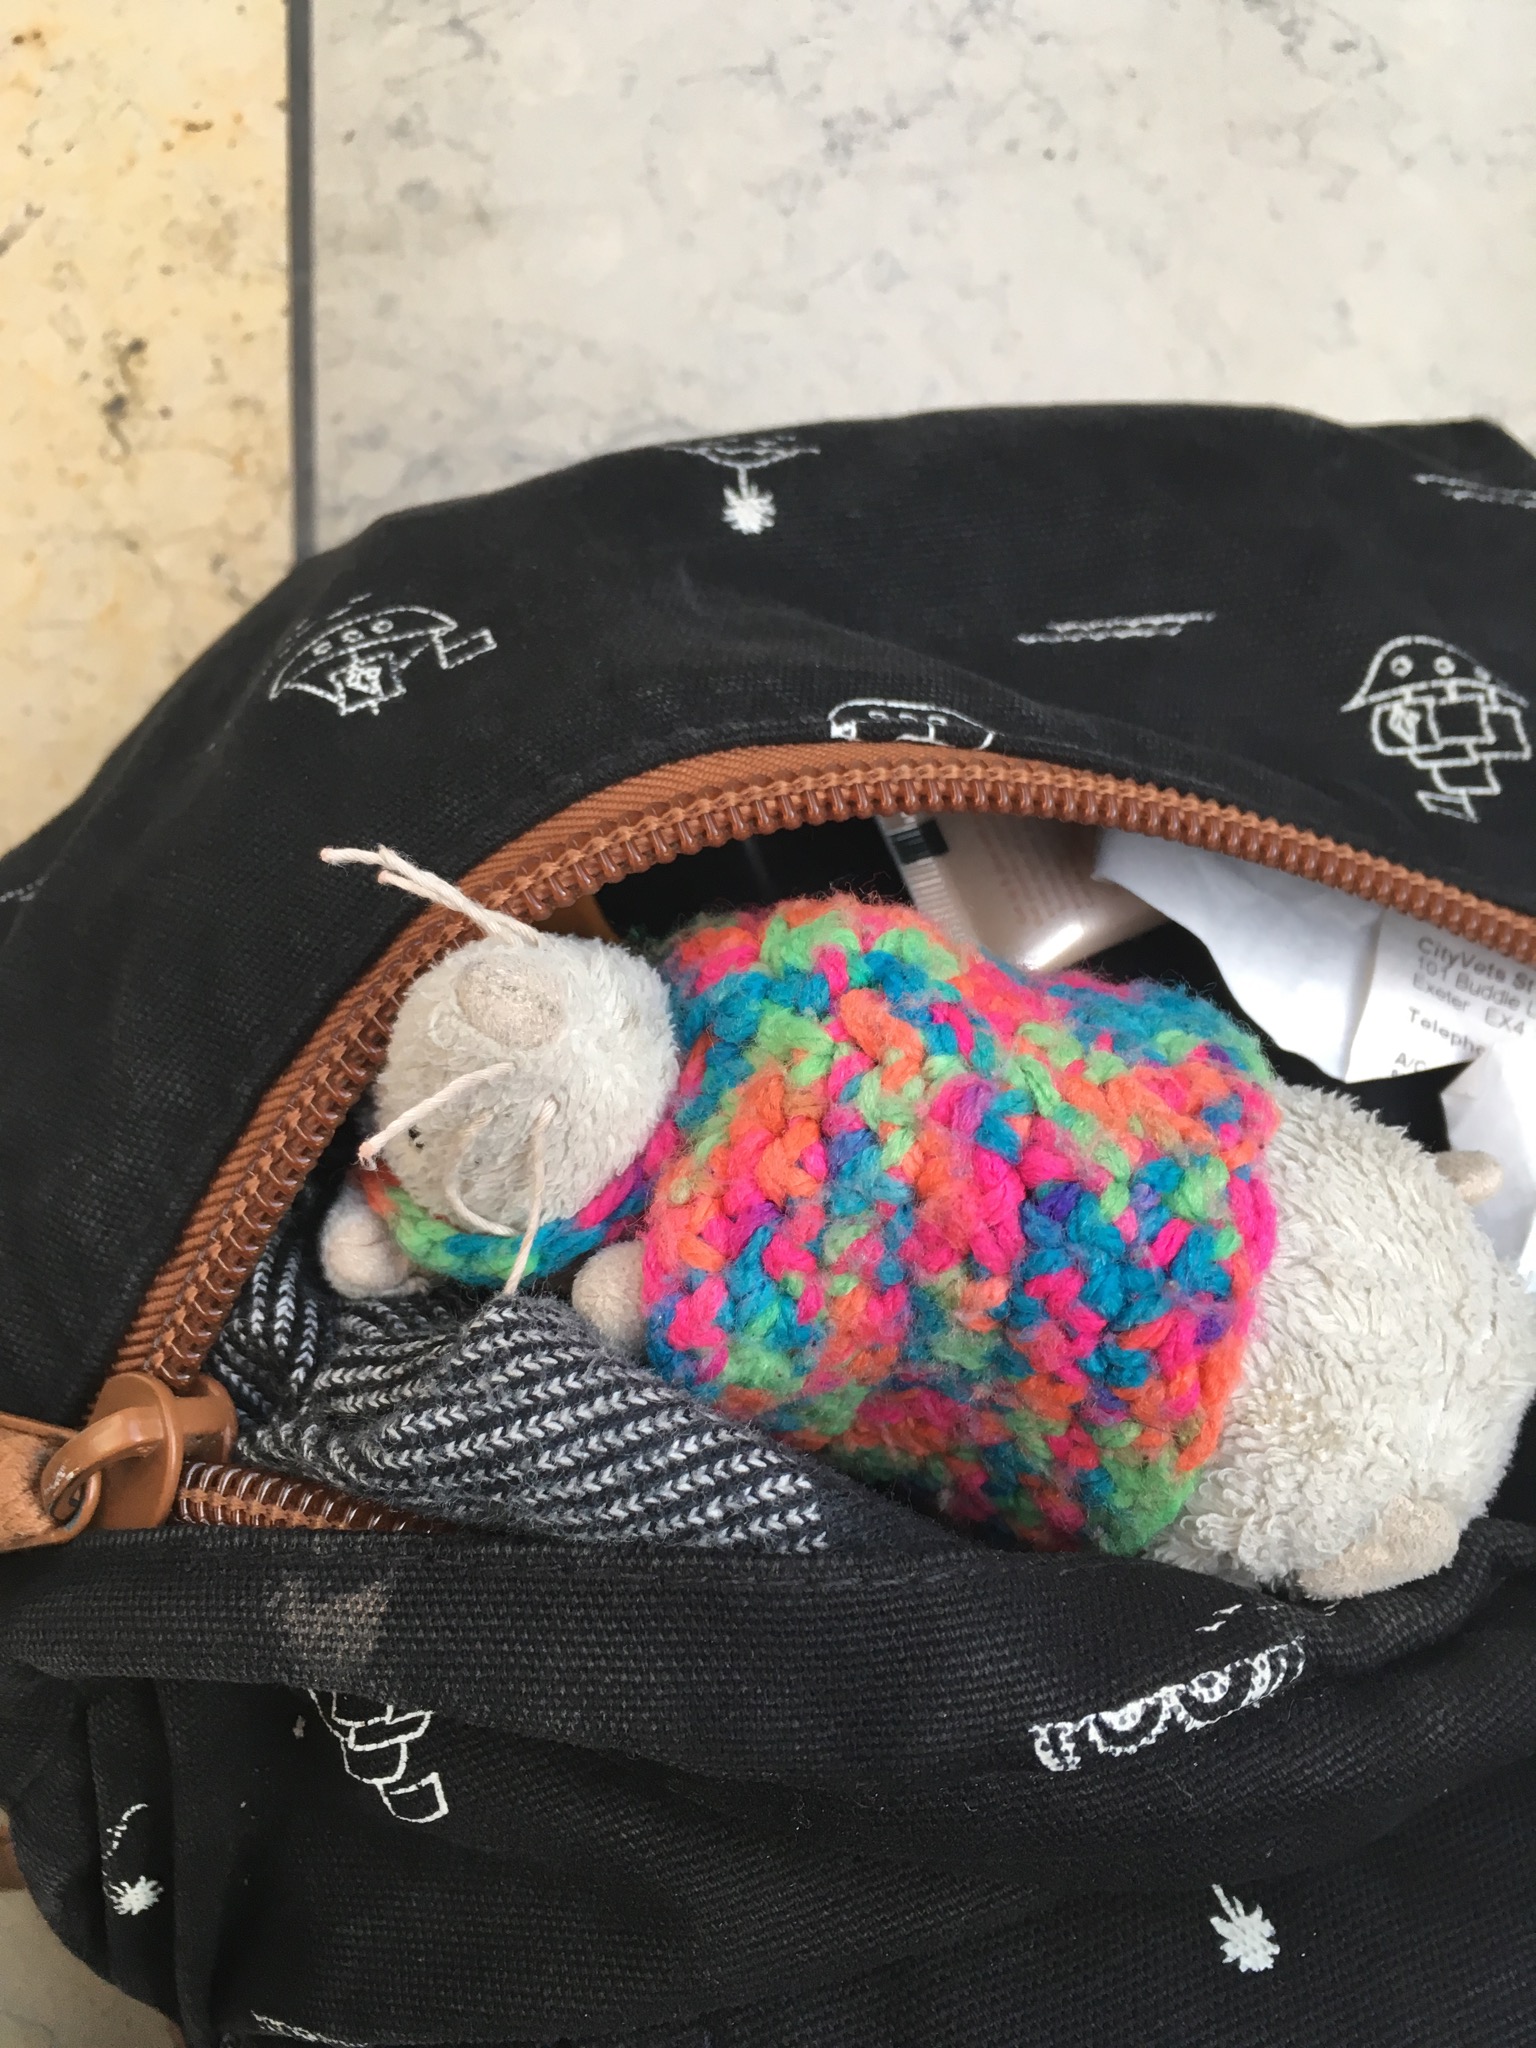 Squeaker spent most of the conference in my bag, and was still completed exhausted by the end of it.